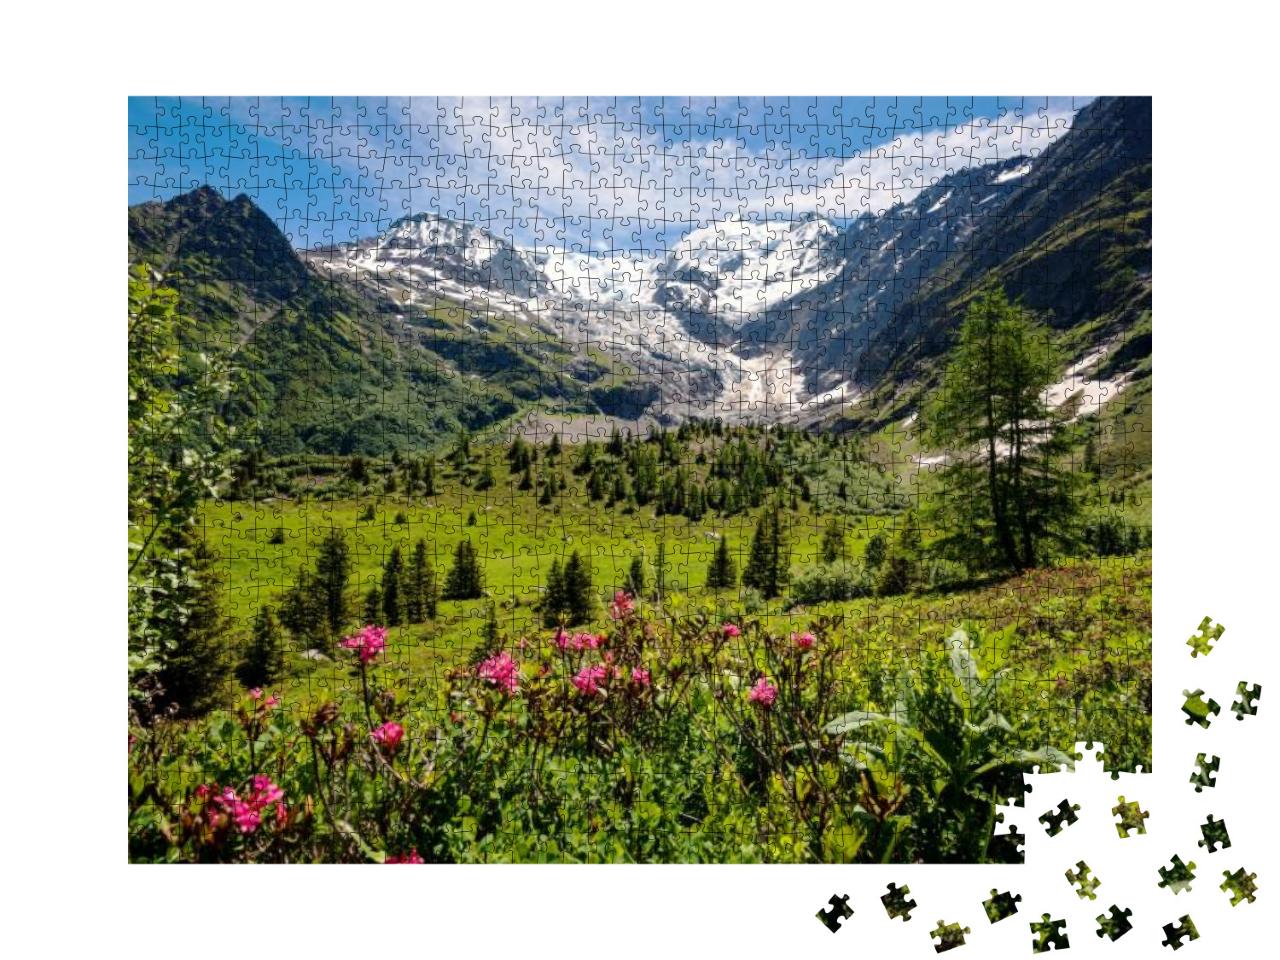 Amazing Panorama of French Alps, Part of Famous Trek - To... Jigsaw Puzzle with 1000 pieces